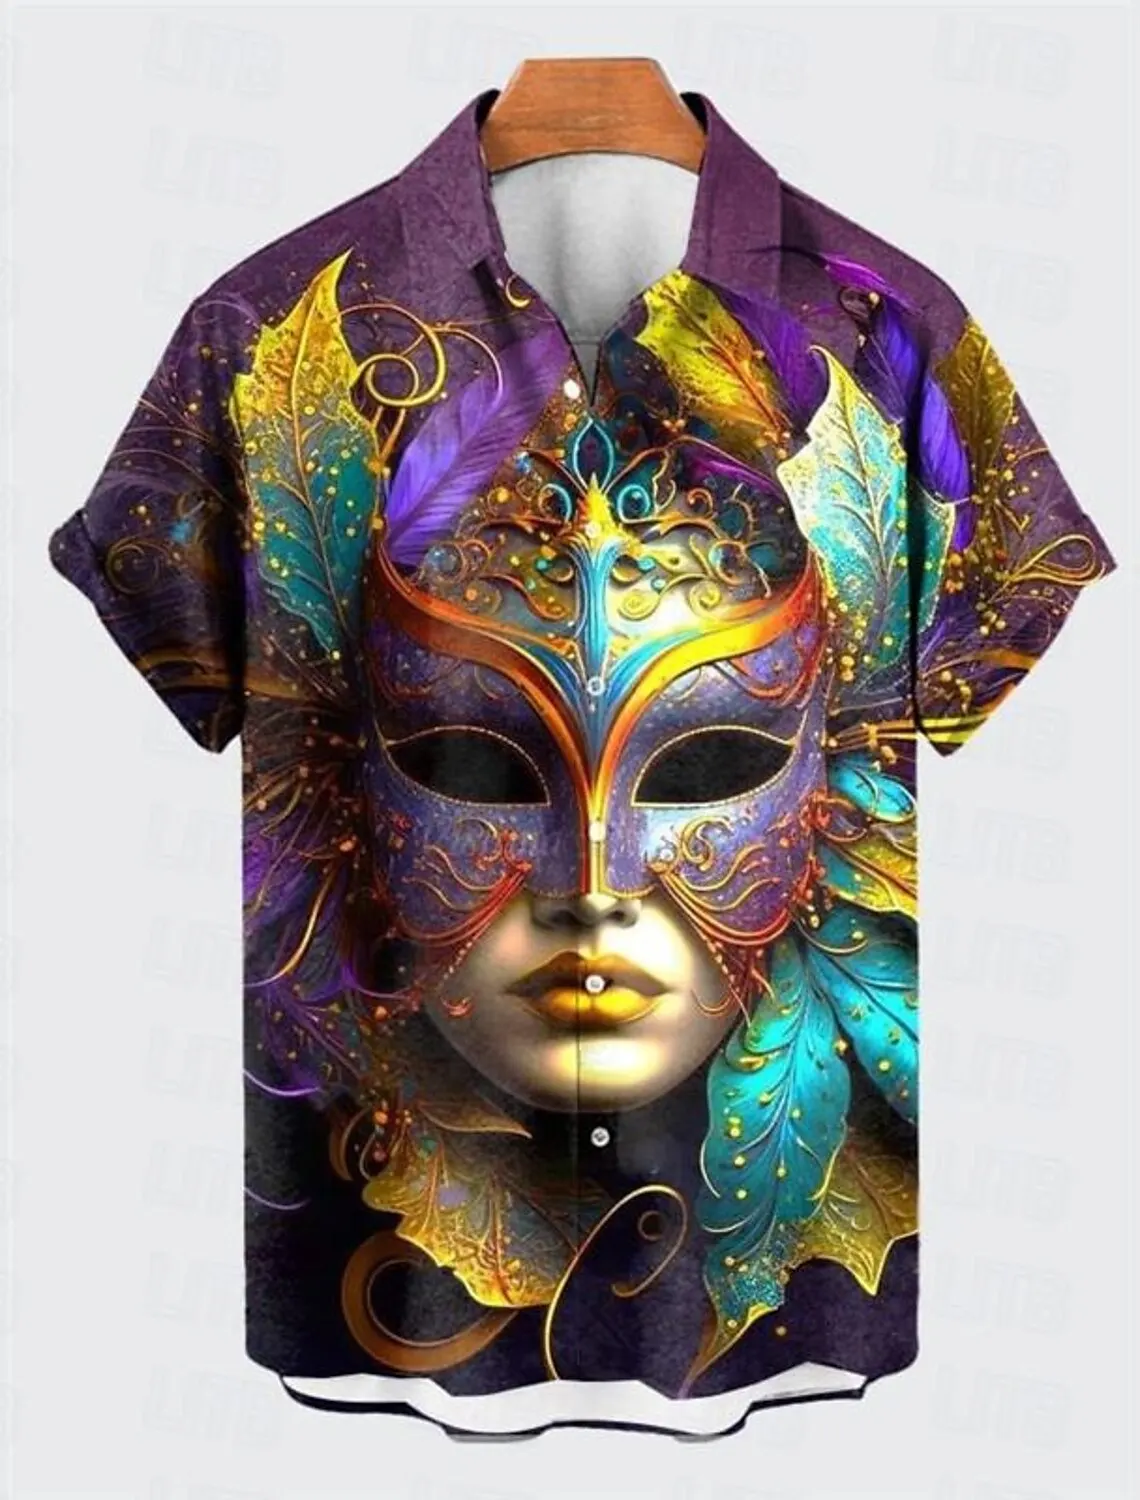 

Mask Artistic Abstract Men's Shirt Daily Going out Weekend Summer Turndown Short Sleeves 4-Way Stretch Fabric Shirt Carnival